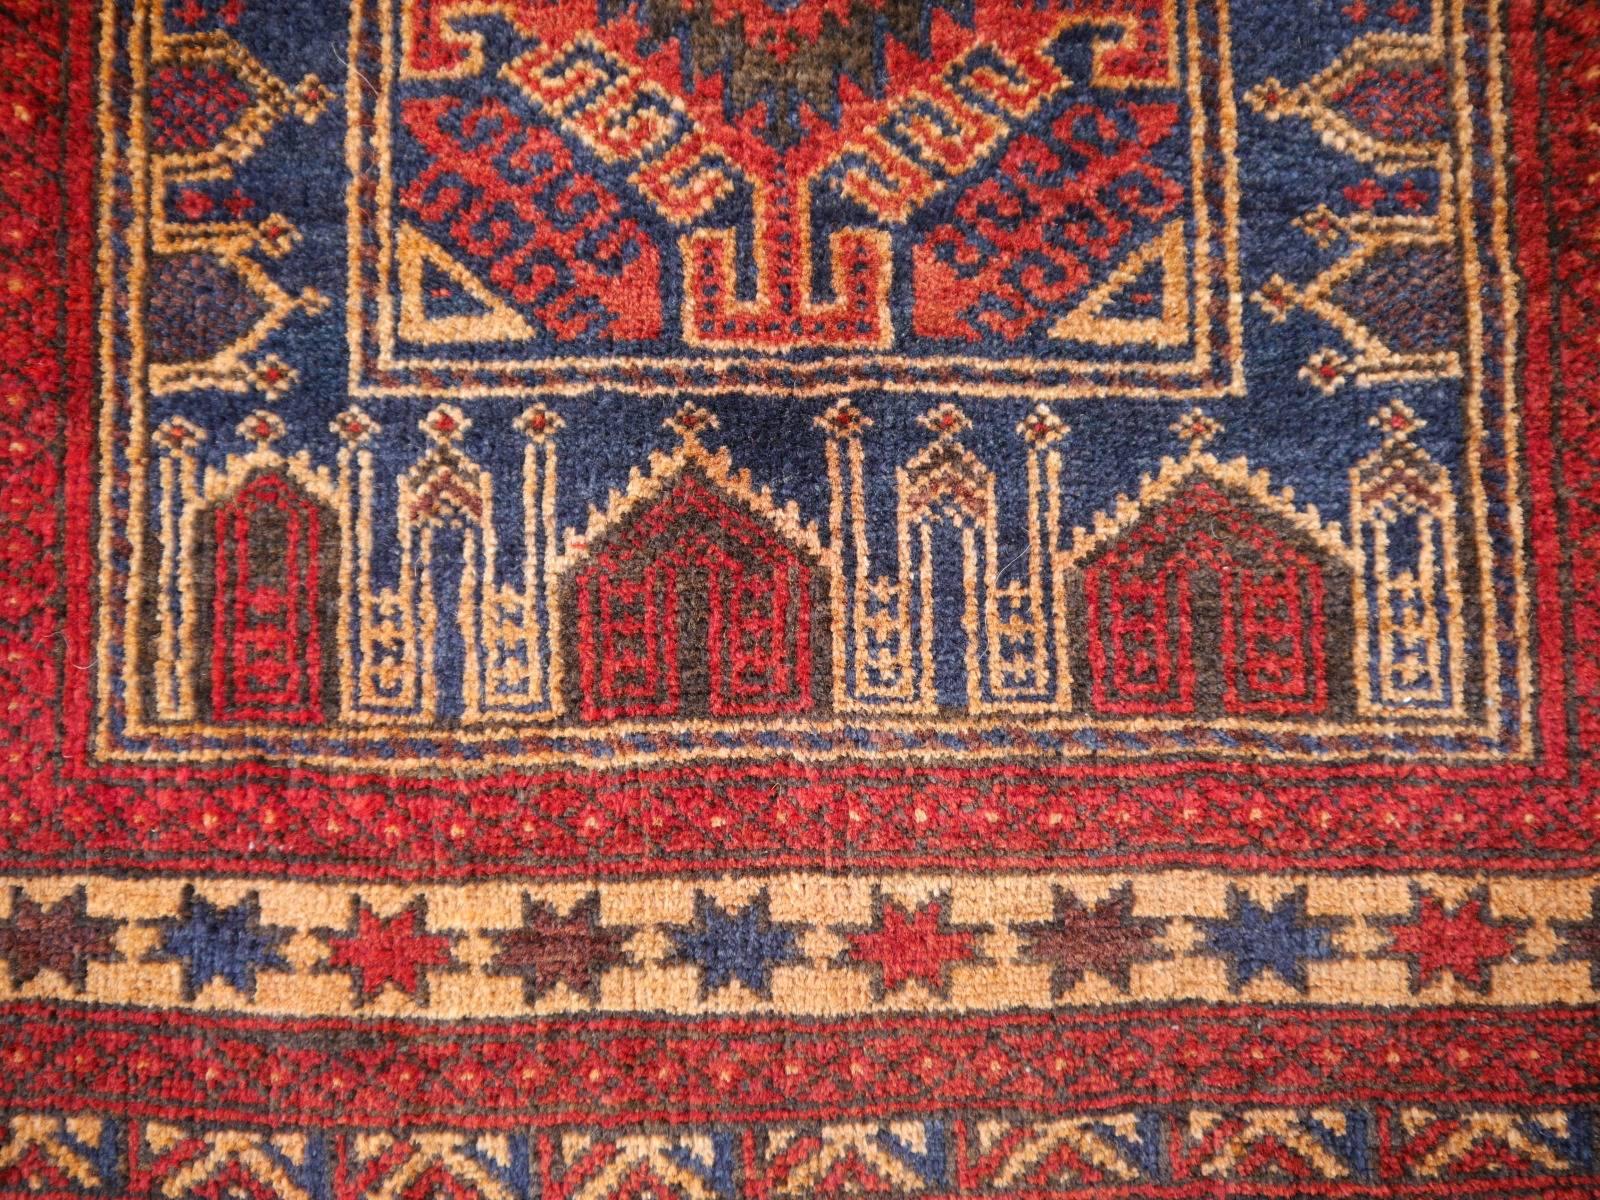 Vintage Balouch Tribal Prayer Rug Blue and Rust Color 2